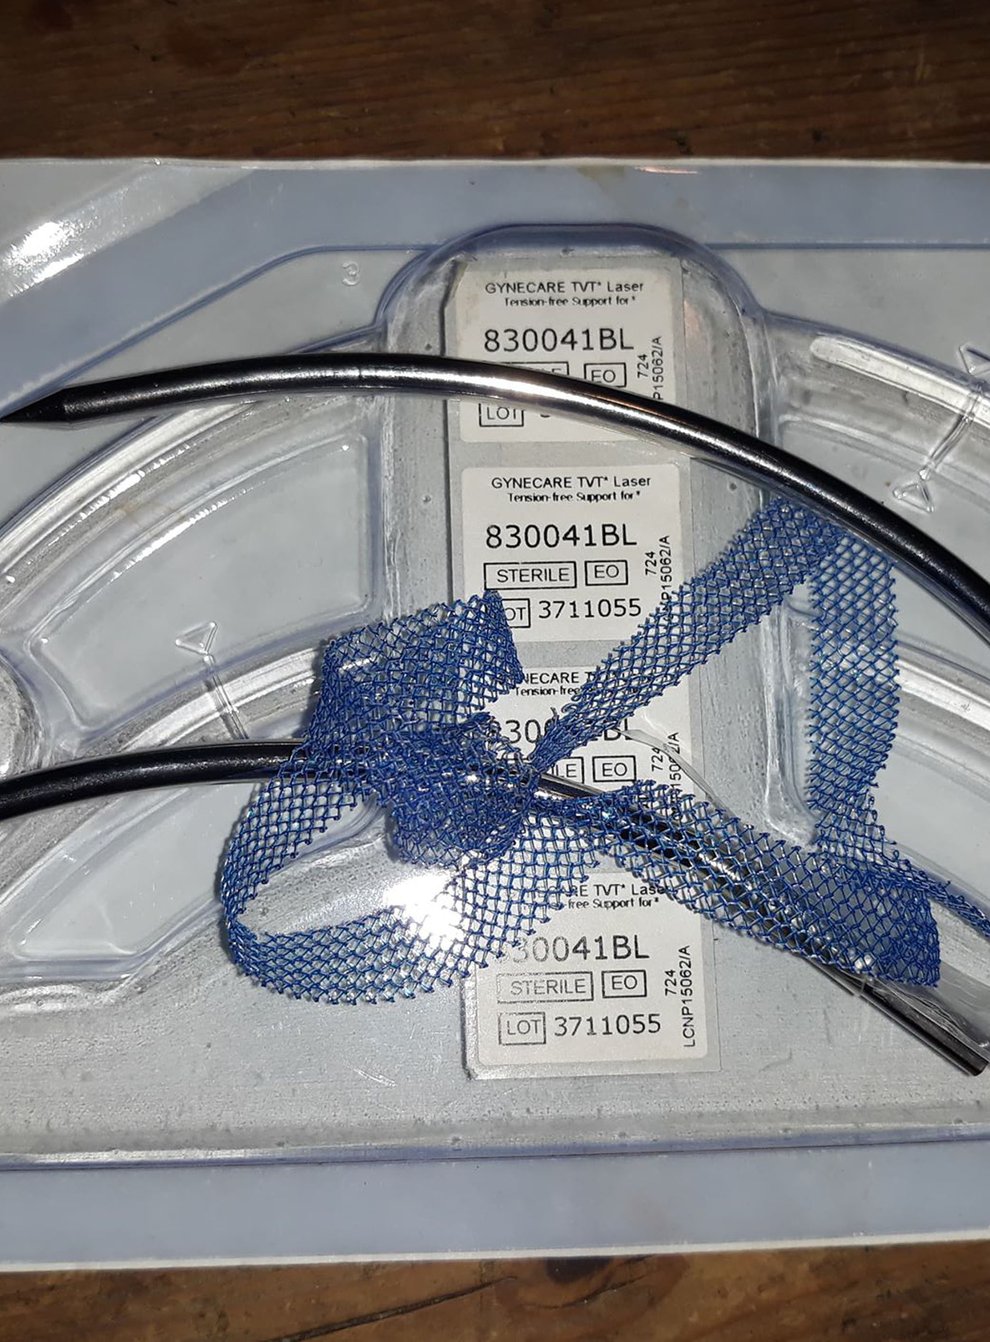 A surgical mesh kit